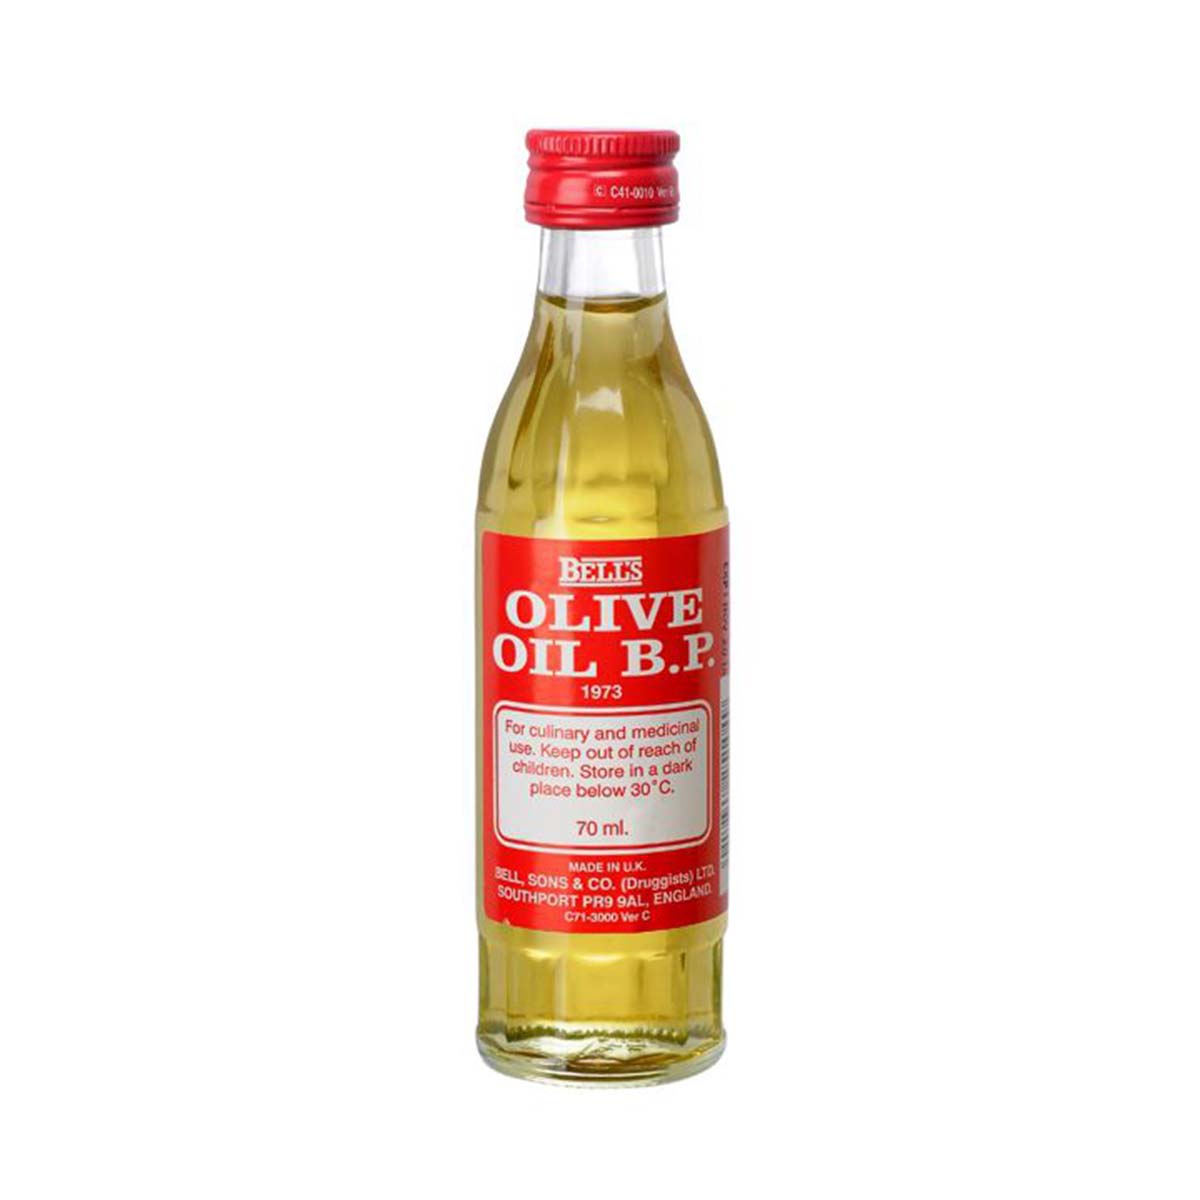 Bell Olive Oil B.P - Pronatural